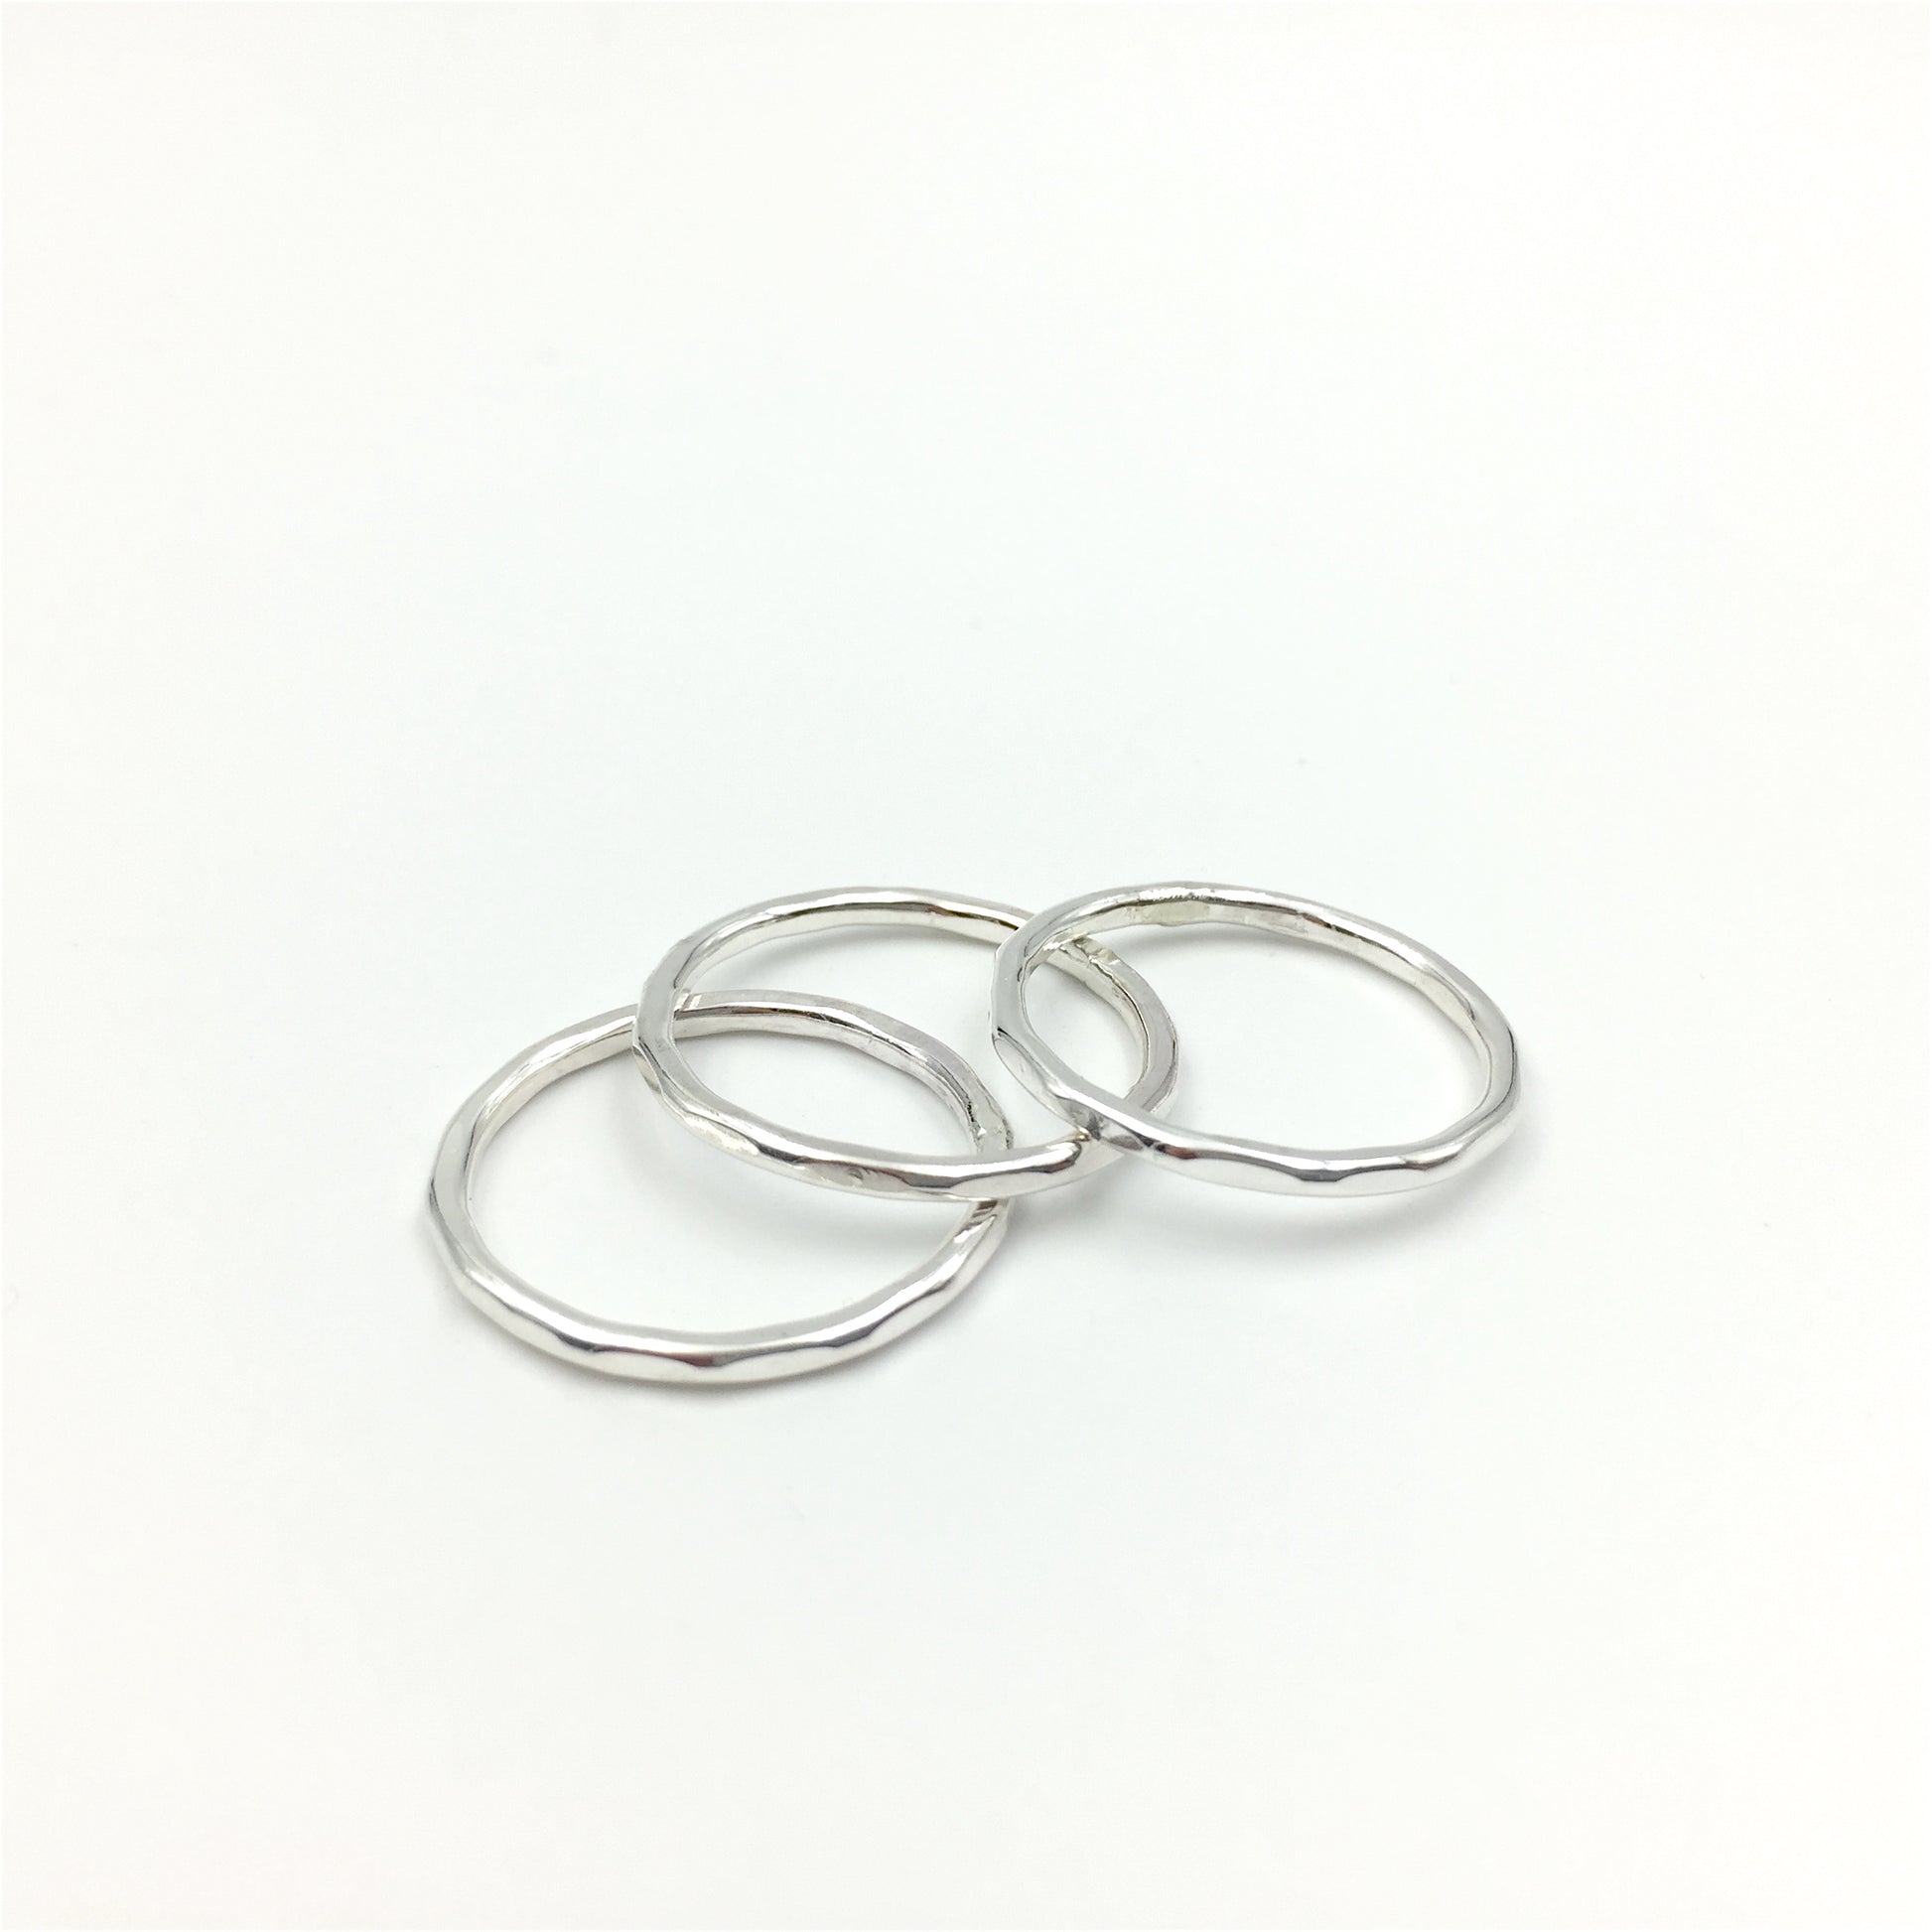 Dainty sterling silver stacking rings by Knucklekiss